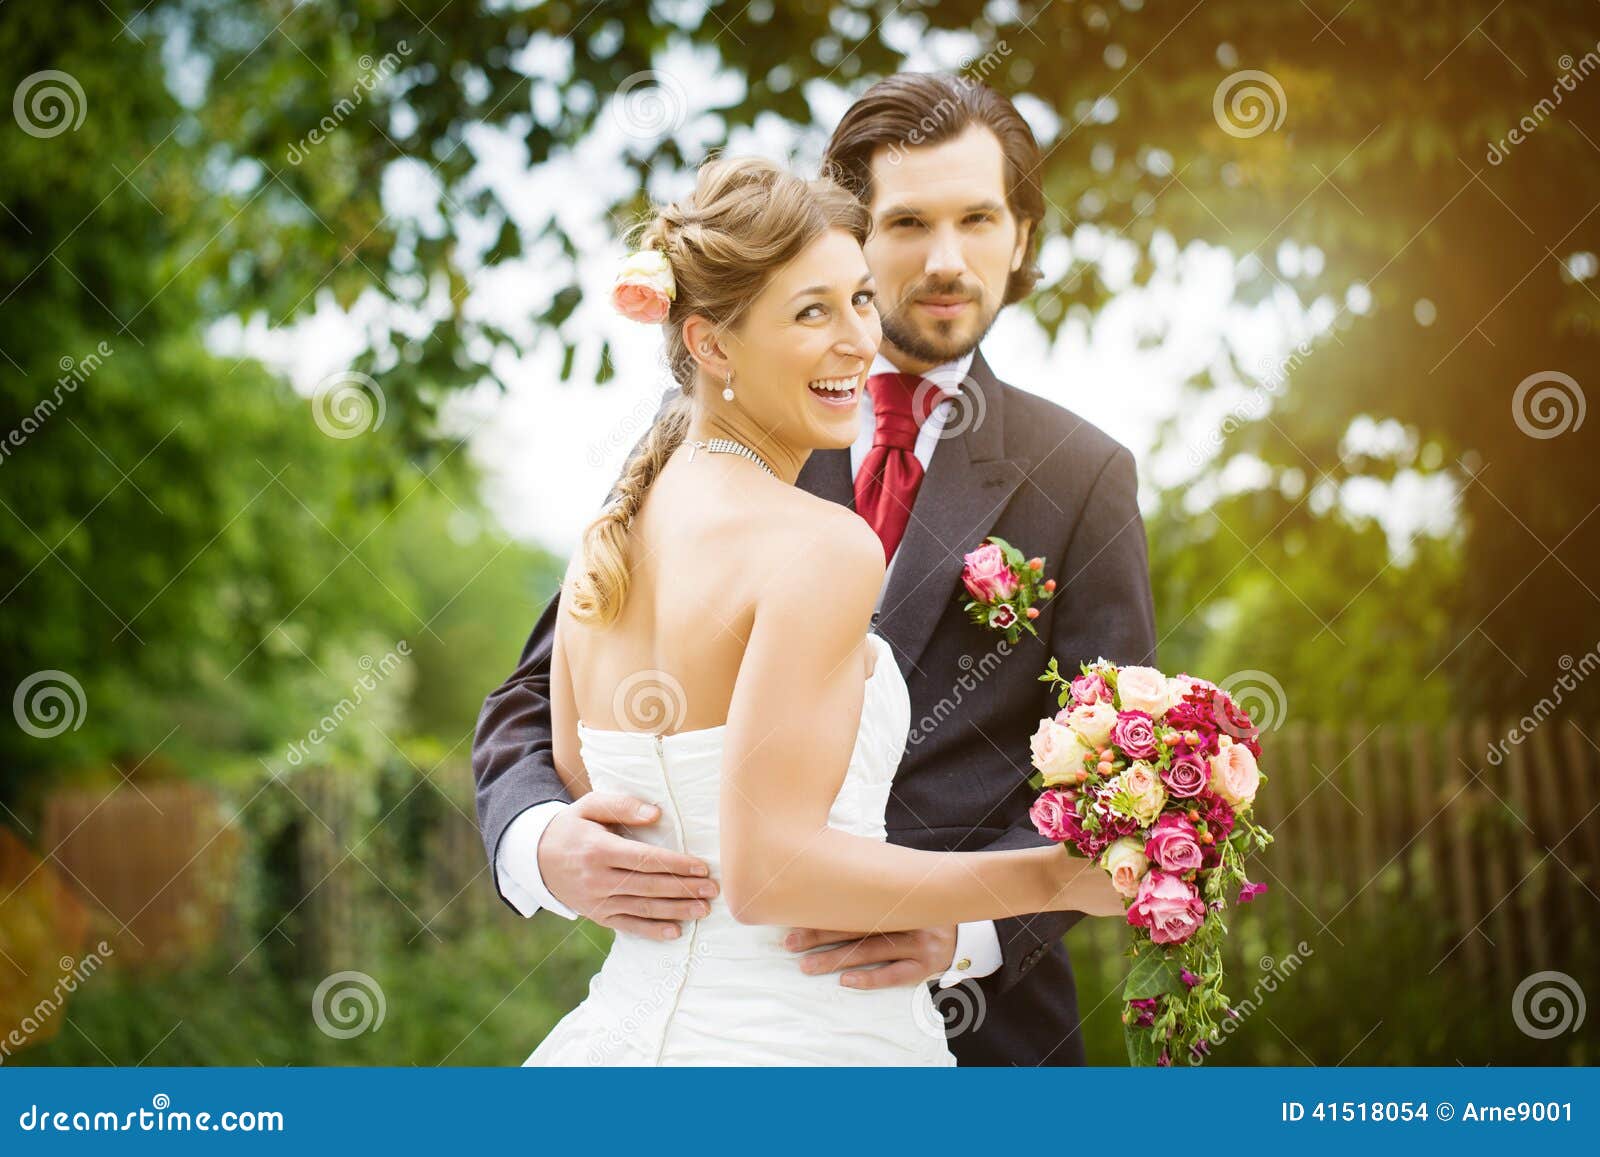 wedding bride and groom in a meadow